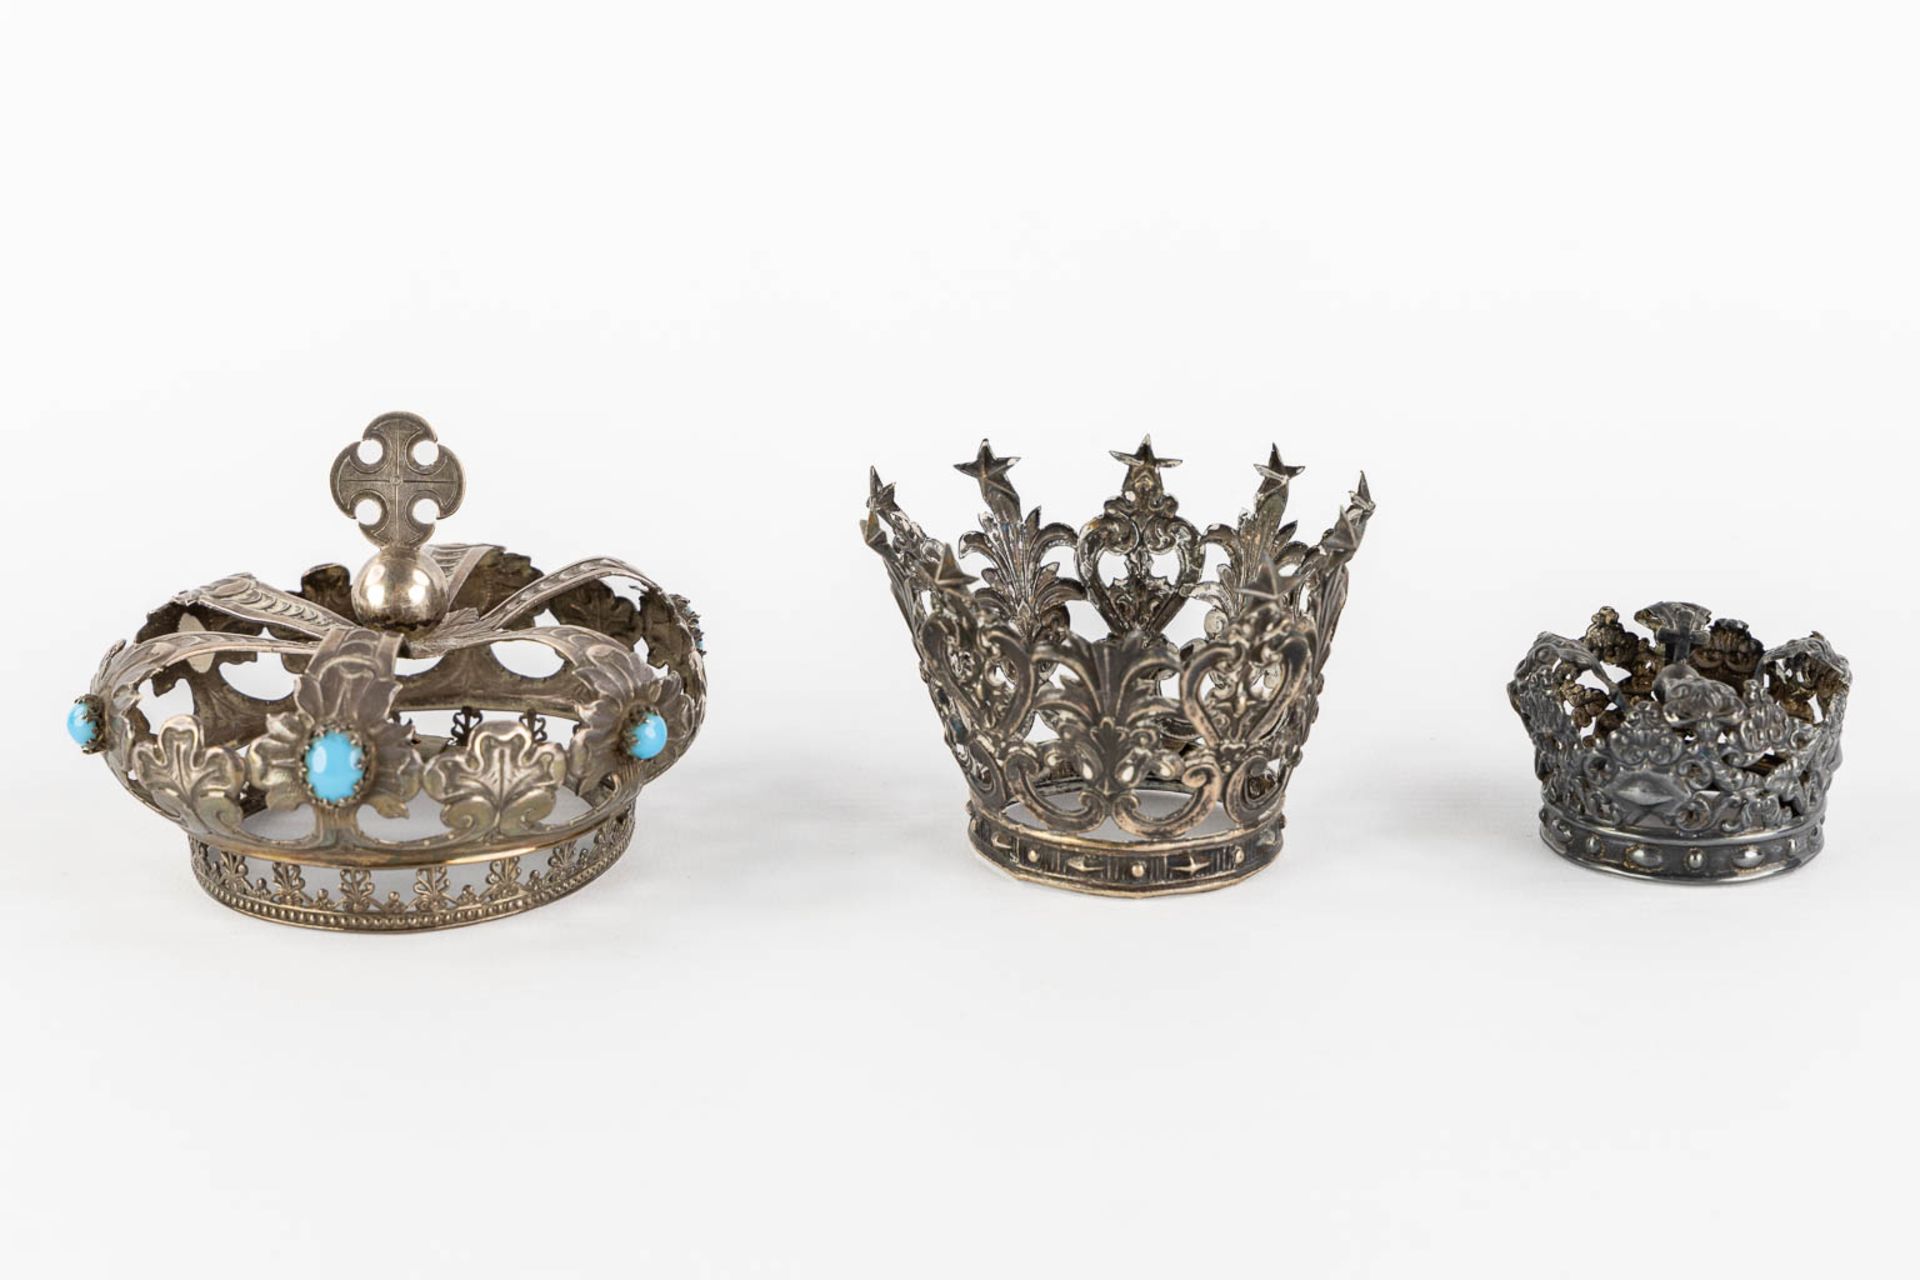 4 silver crowns and a sceptre, added a fabric crown. 211g. (L:33,5 cm) - Image 6 of 8